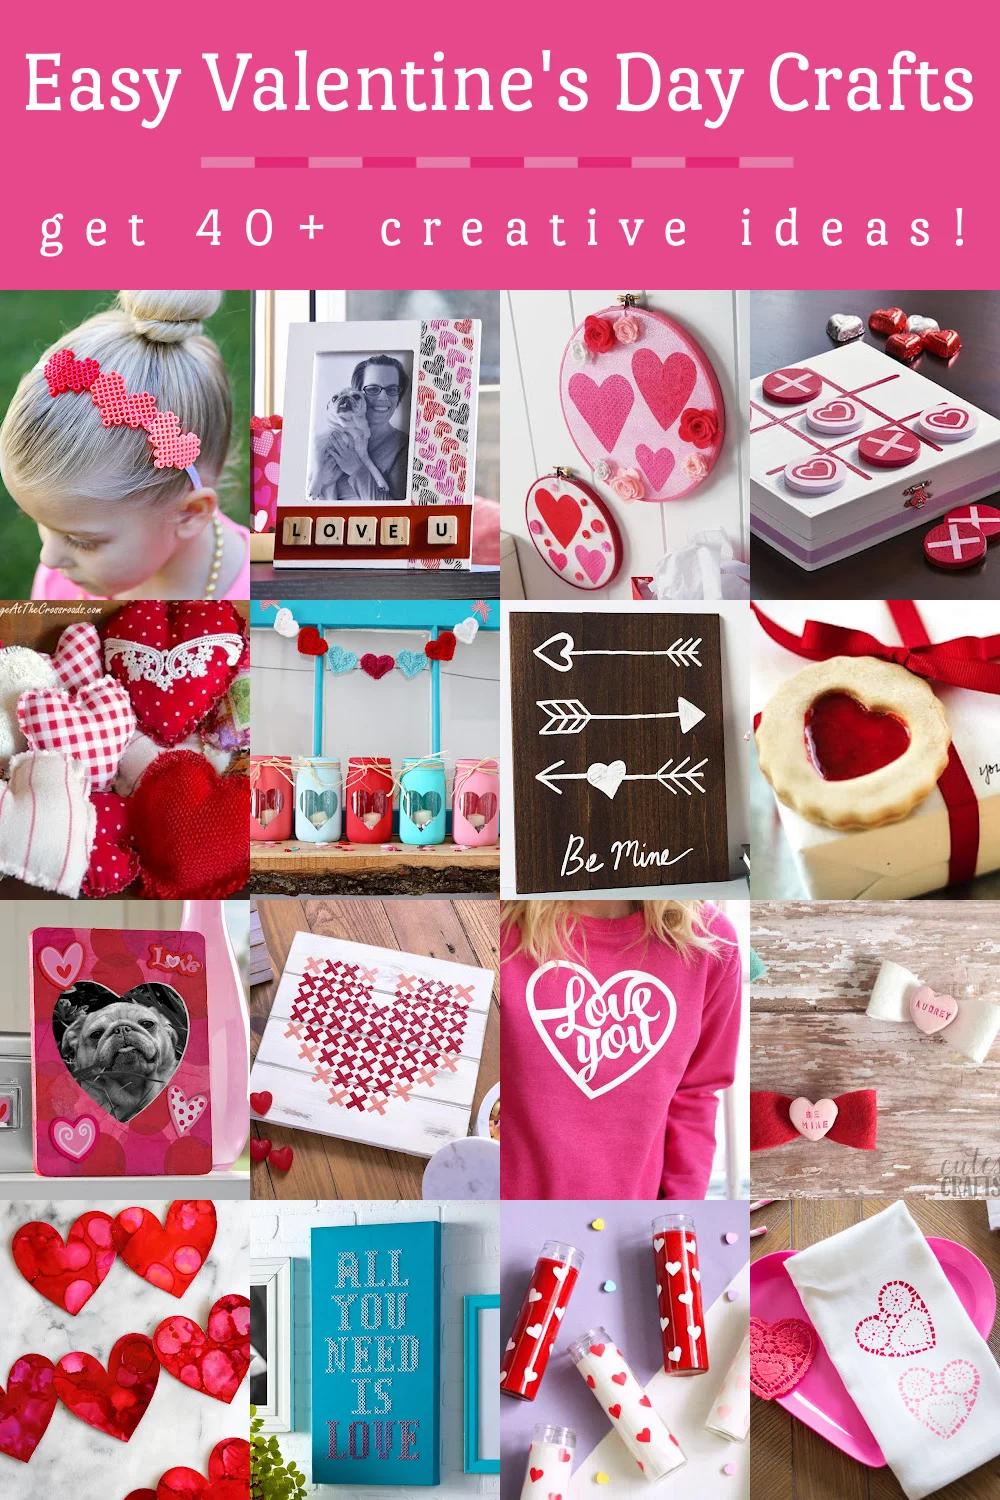 Easy Valentine Projects You're Going to Love! - Mod Podge Rocks